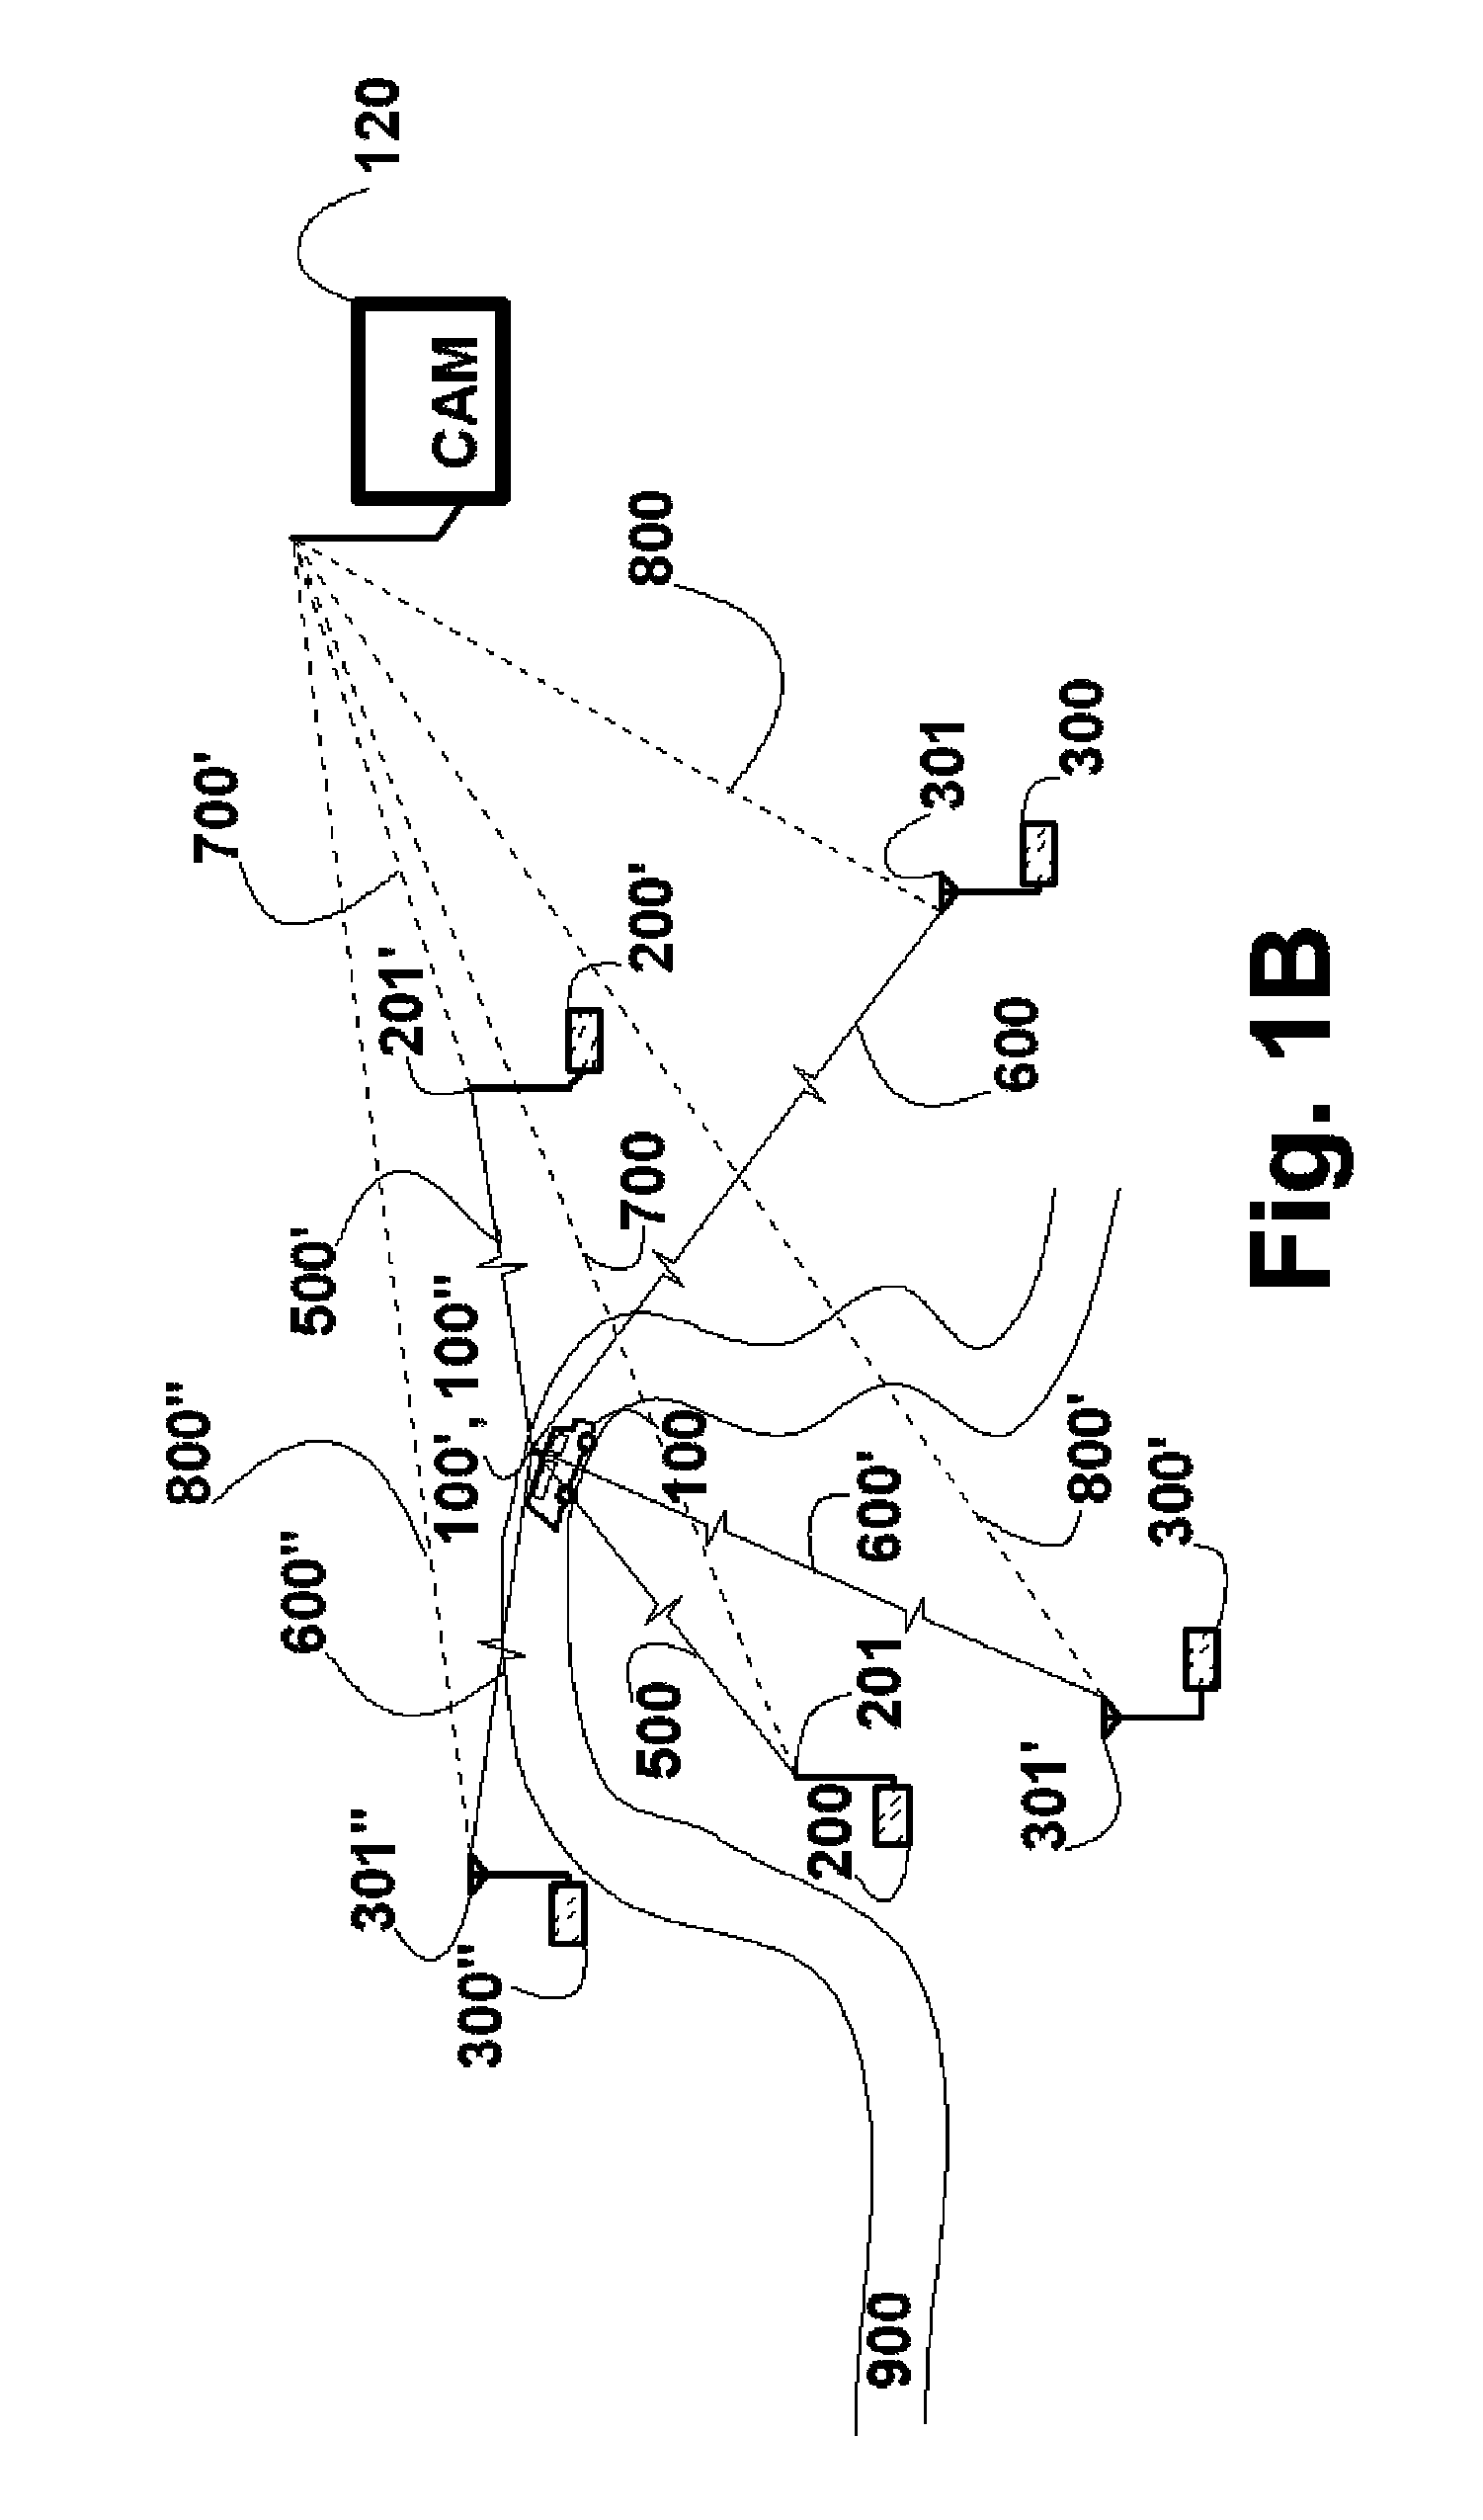 System and method for point to multipoint radio survey